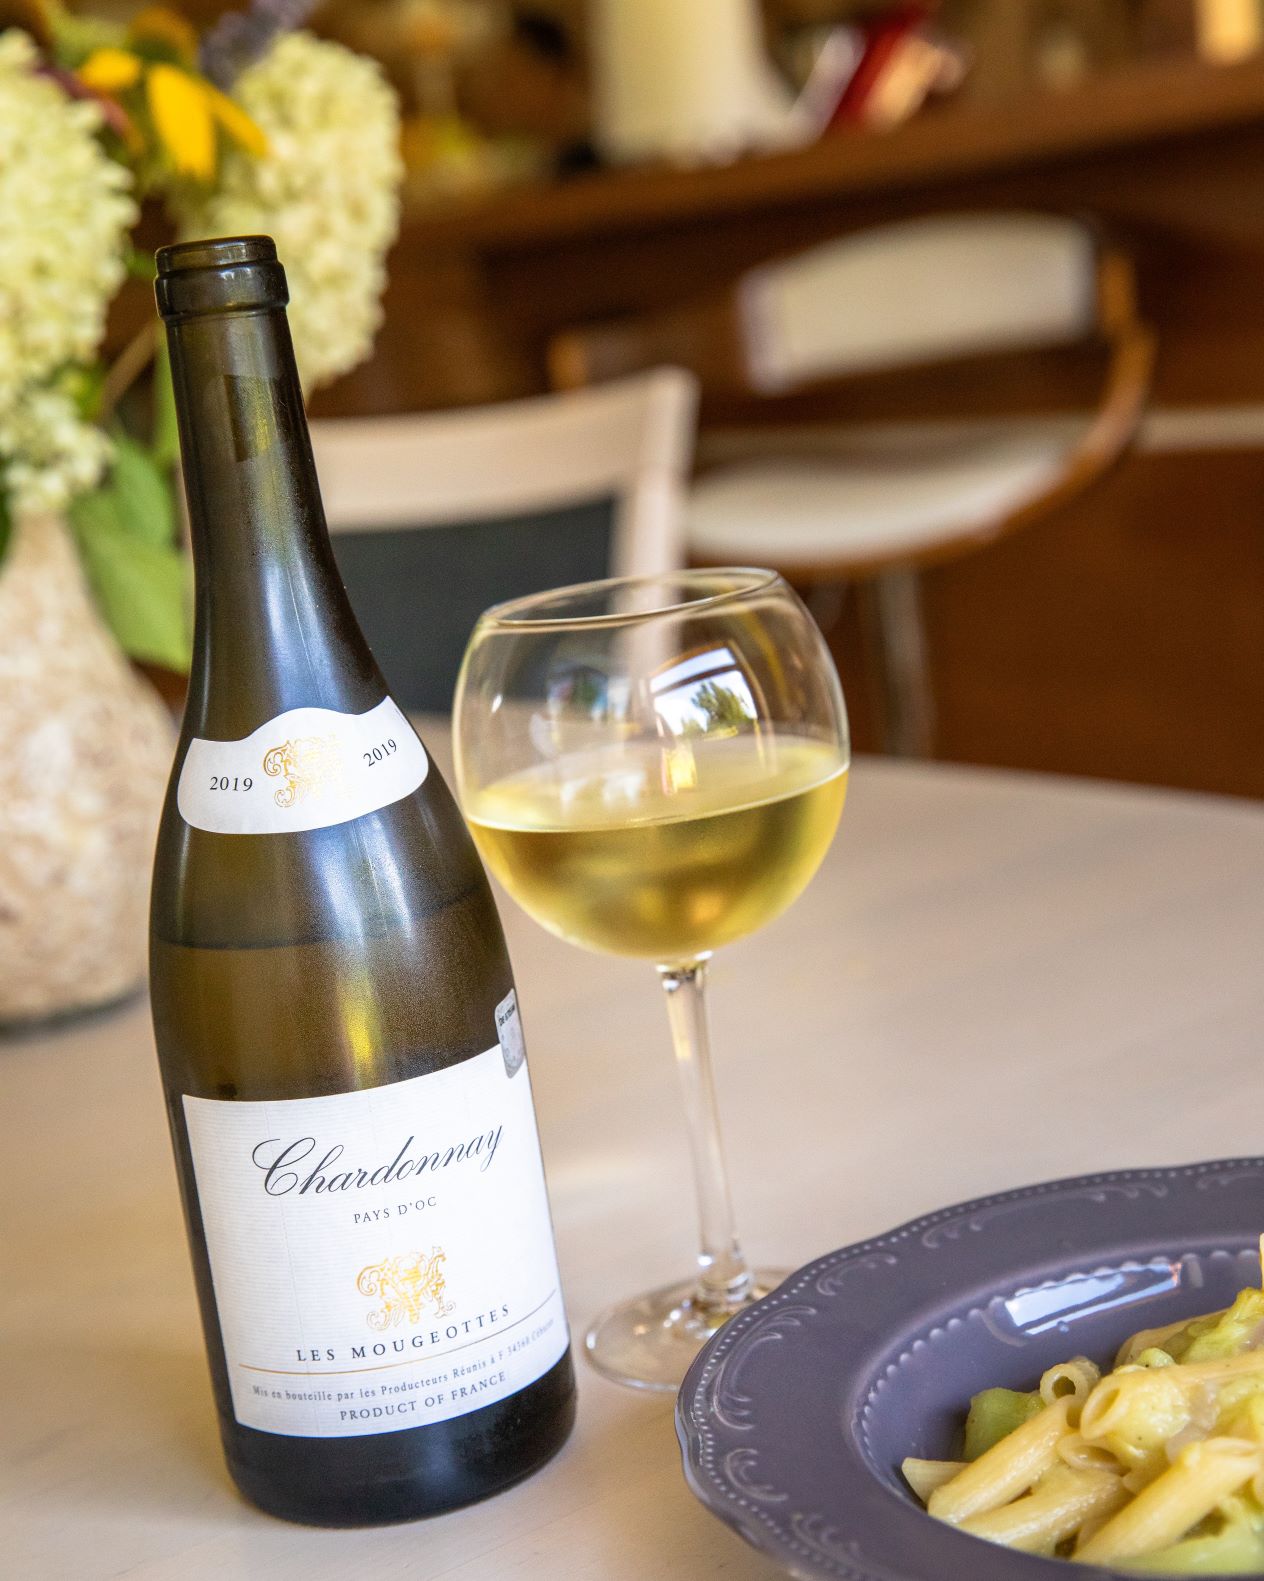 Pays d'Oc Chardonnay Bottle and Glass with Pasta Dish